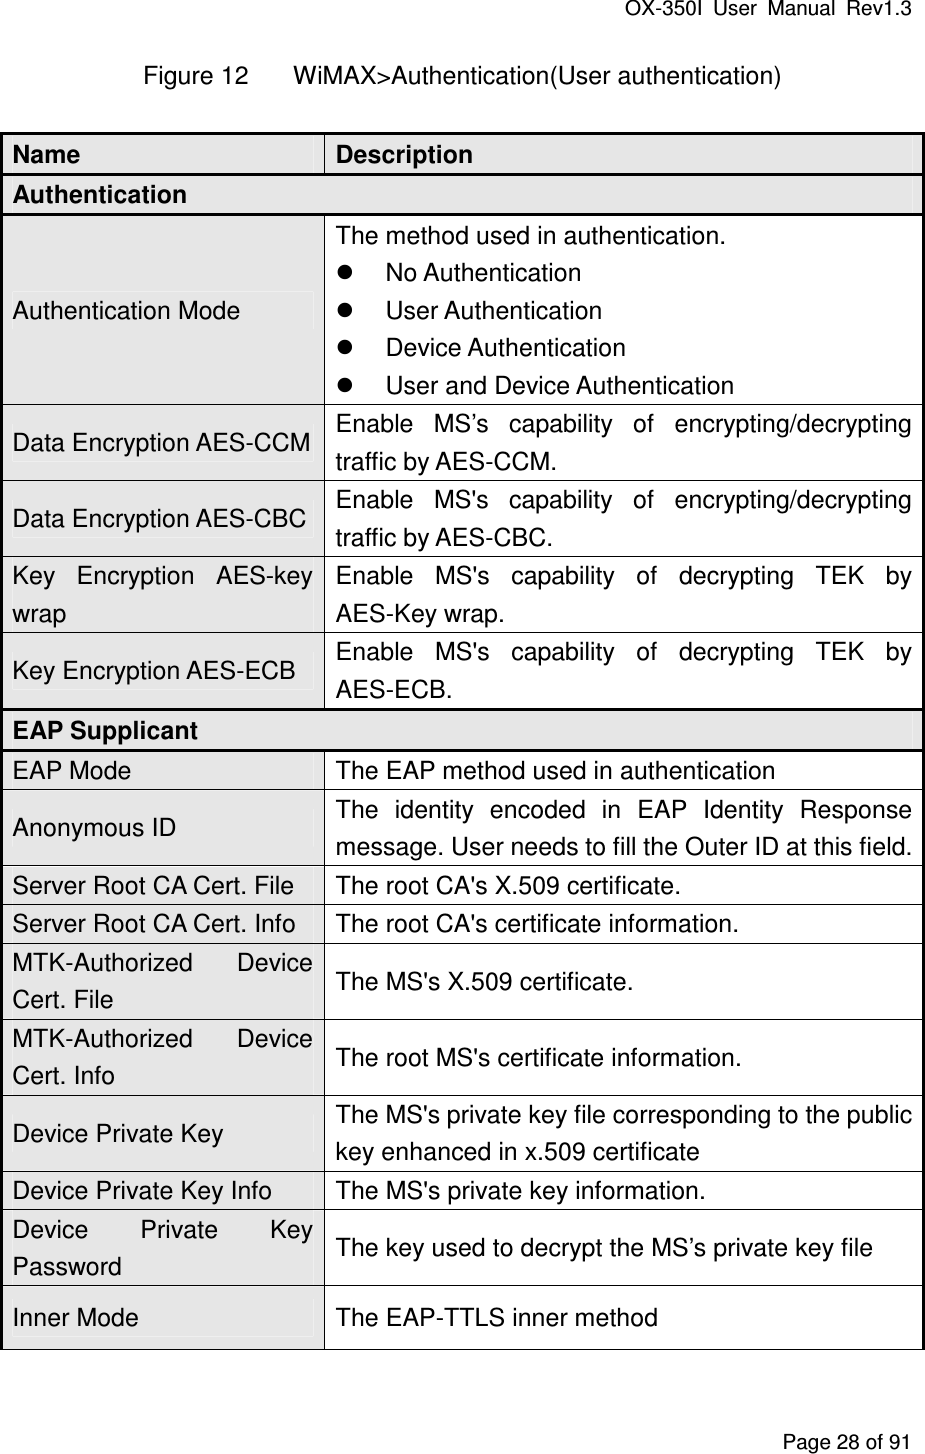 OX-350I  User  Manual  Rev1.3 Page 28 of 91 Figure 12  WiMAX&gt;Authentication(User authentication) Name  Description Authentication Authentication Mode The method used in authentication.   No Authentication   User Authentication   Device Authentication   User and Device Authentication Data Encryption AES-CCM Enable  MS’s  capability  of  encrypting/decrypting traffic by AES-CCM. Data Encryption AES-CBC Enable  MS&apos;s  capability  of  encrypting/decrypting traffic by AES-CBC. Key  Encryption  AES-key wrap Enable  MS&apos;s  capability  of  decrypting  TEK  by AES-Key wrap. Key Encryption AES-ECB  Enable  MS&apos;s  capability  of  decrypting  TEK  by AES-ECB. EAP Supplicant EAP Mode  The EAP method used in authentication Anonymous ID  The  identity  encoded  in  EAP  Identity  Response message. User needs to fill the Outer ID at this field. Server Root CA Cert. File  The root CA&apos;s X.509 certificate. Server Root CA Cert. Info  The root CA&apos;s certificate information. MTK-Authorized  Device Cert. File  The MS&apos;s X.509 certificate. MTK-Authorized  Device Cert. Info  The root MS&apos;s certificate information. Device Private Key  The MS&apos;s private key file corresponding to the public key enhanced in x.509 certificate Device Private Key Info  The MS&apos;s private key information. Device  Private  Key Password  The key used to decrypt the MS’s private key file Inner Mode  The EAP-TTLS inner method 